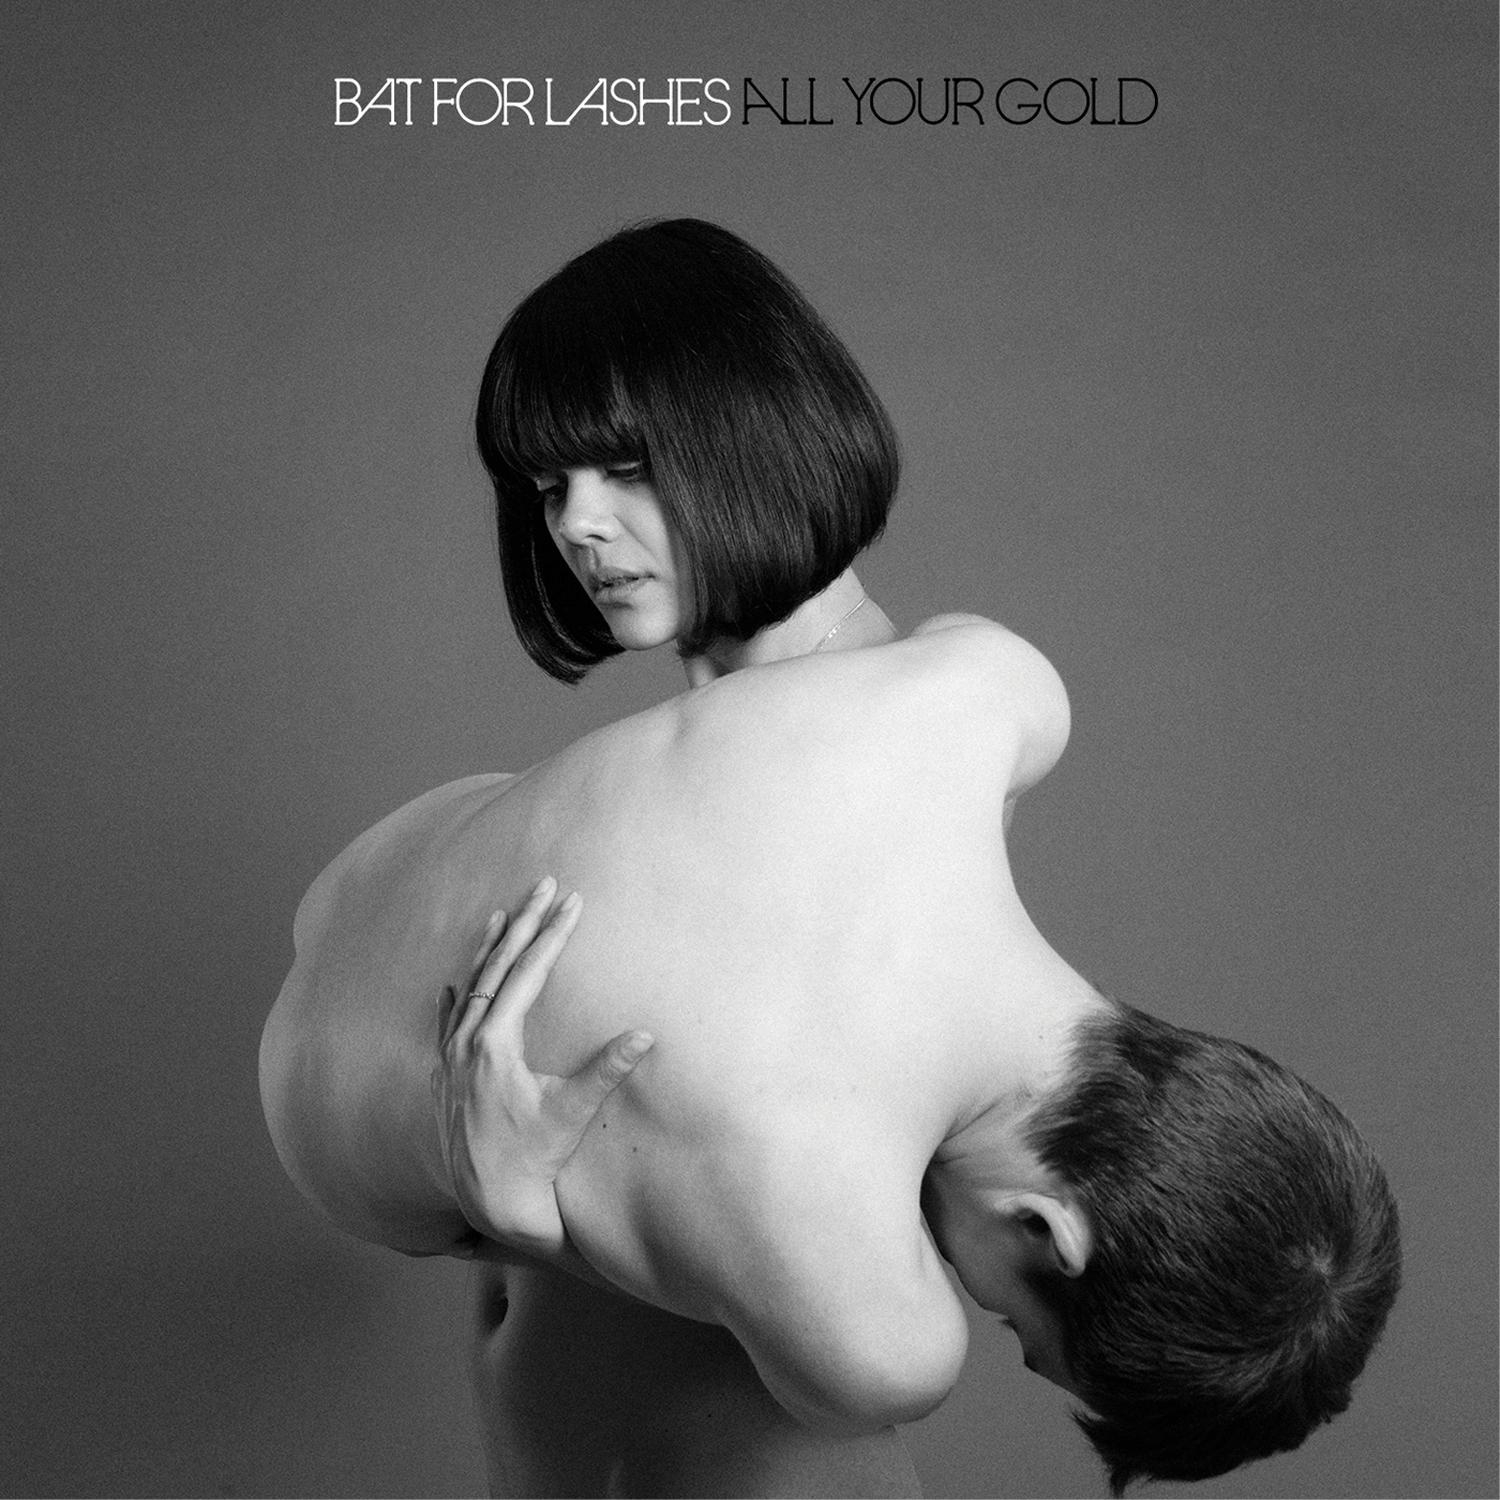 Bat For Lashes announce next single "All Your Gold"